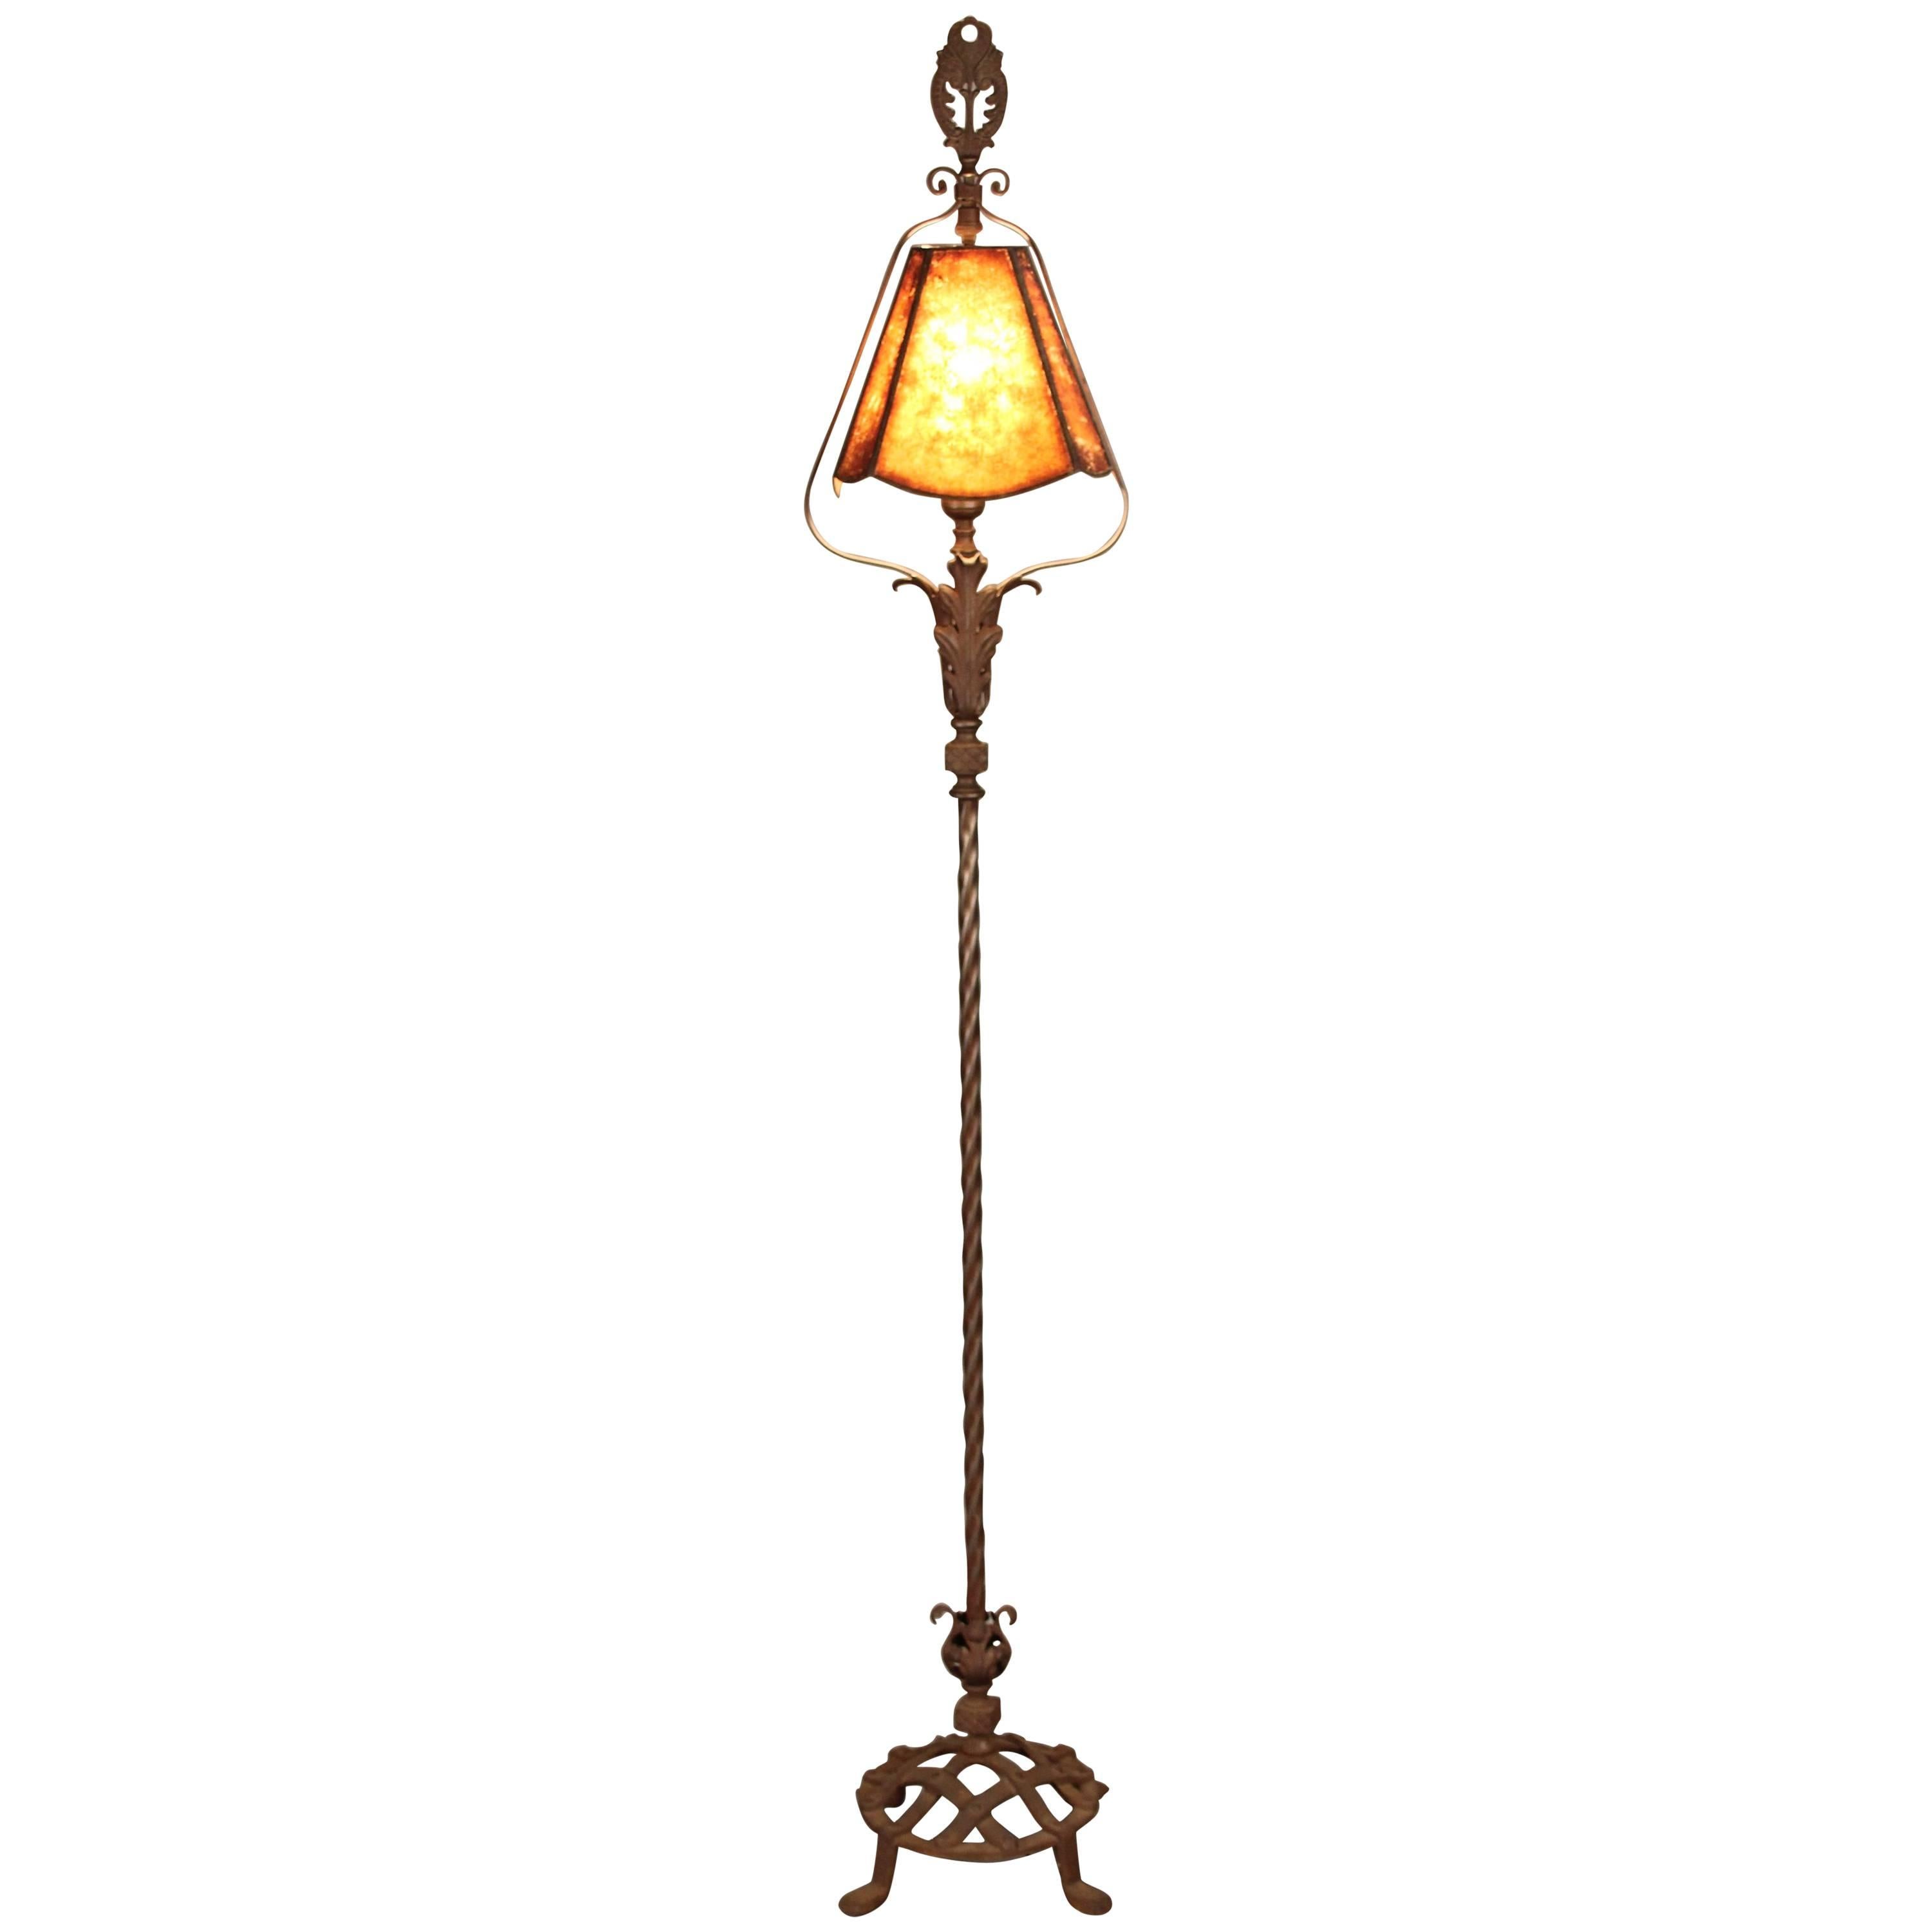 Attractive 1920s Floor Lamp with Original Mica Shade For Sale